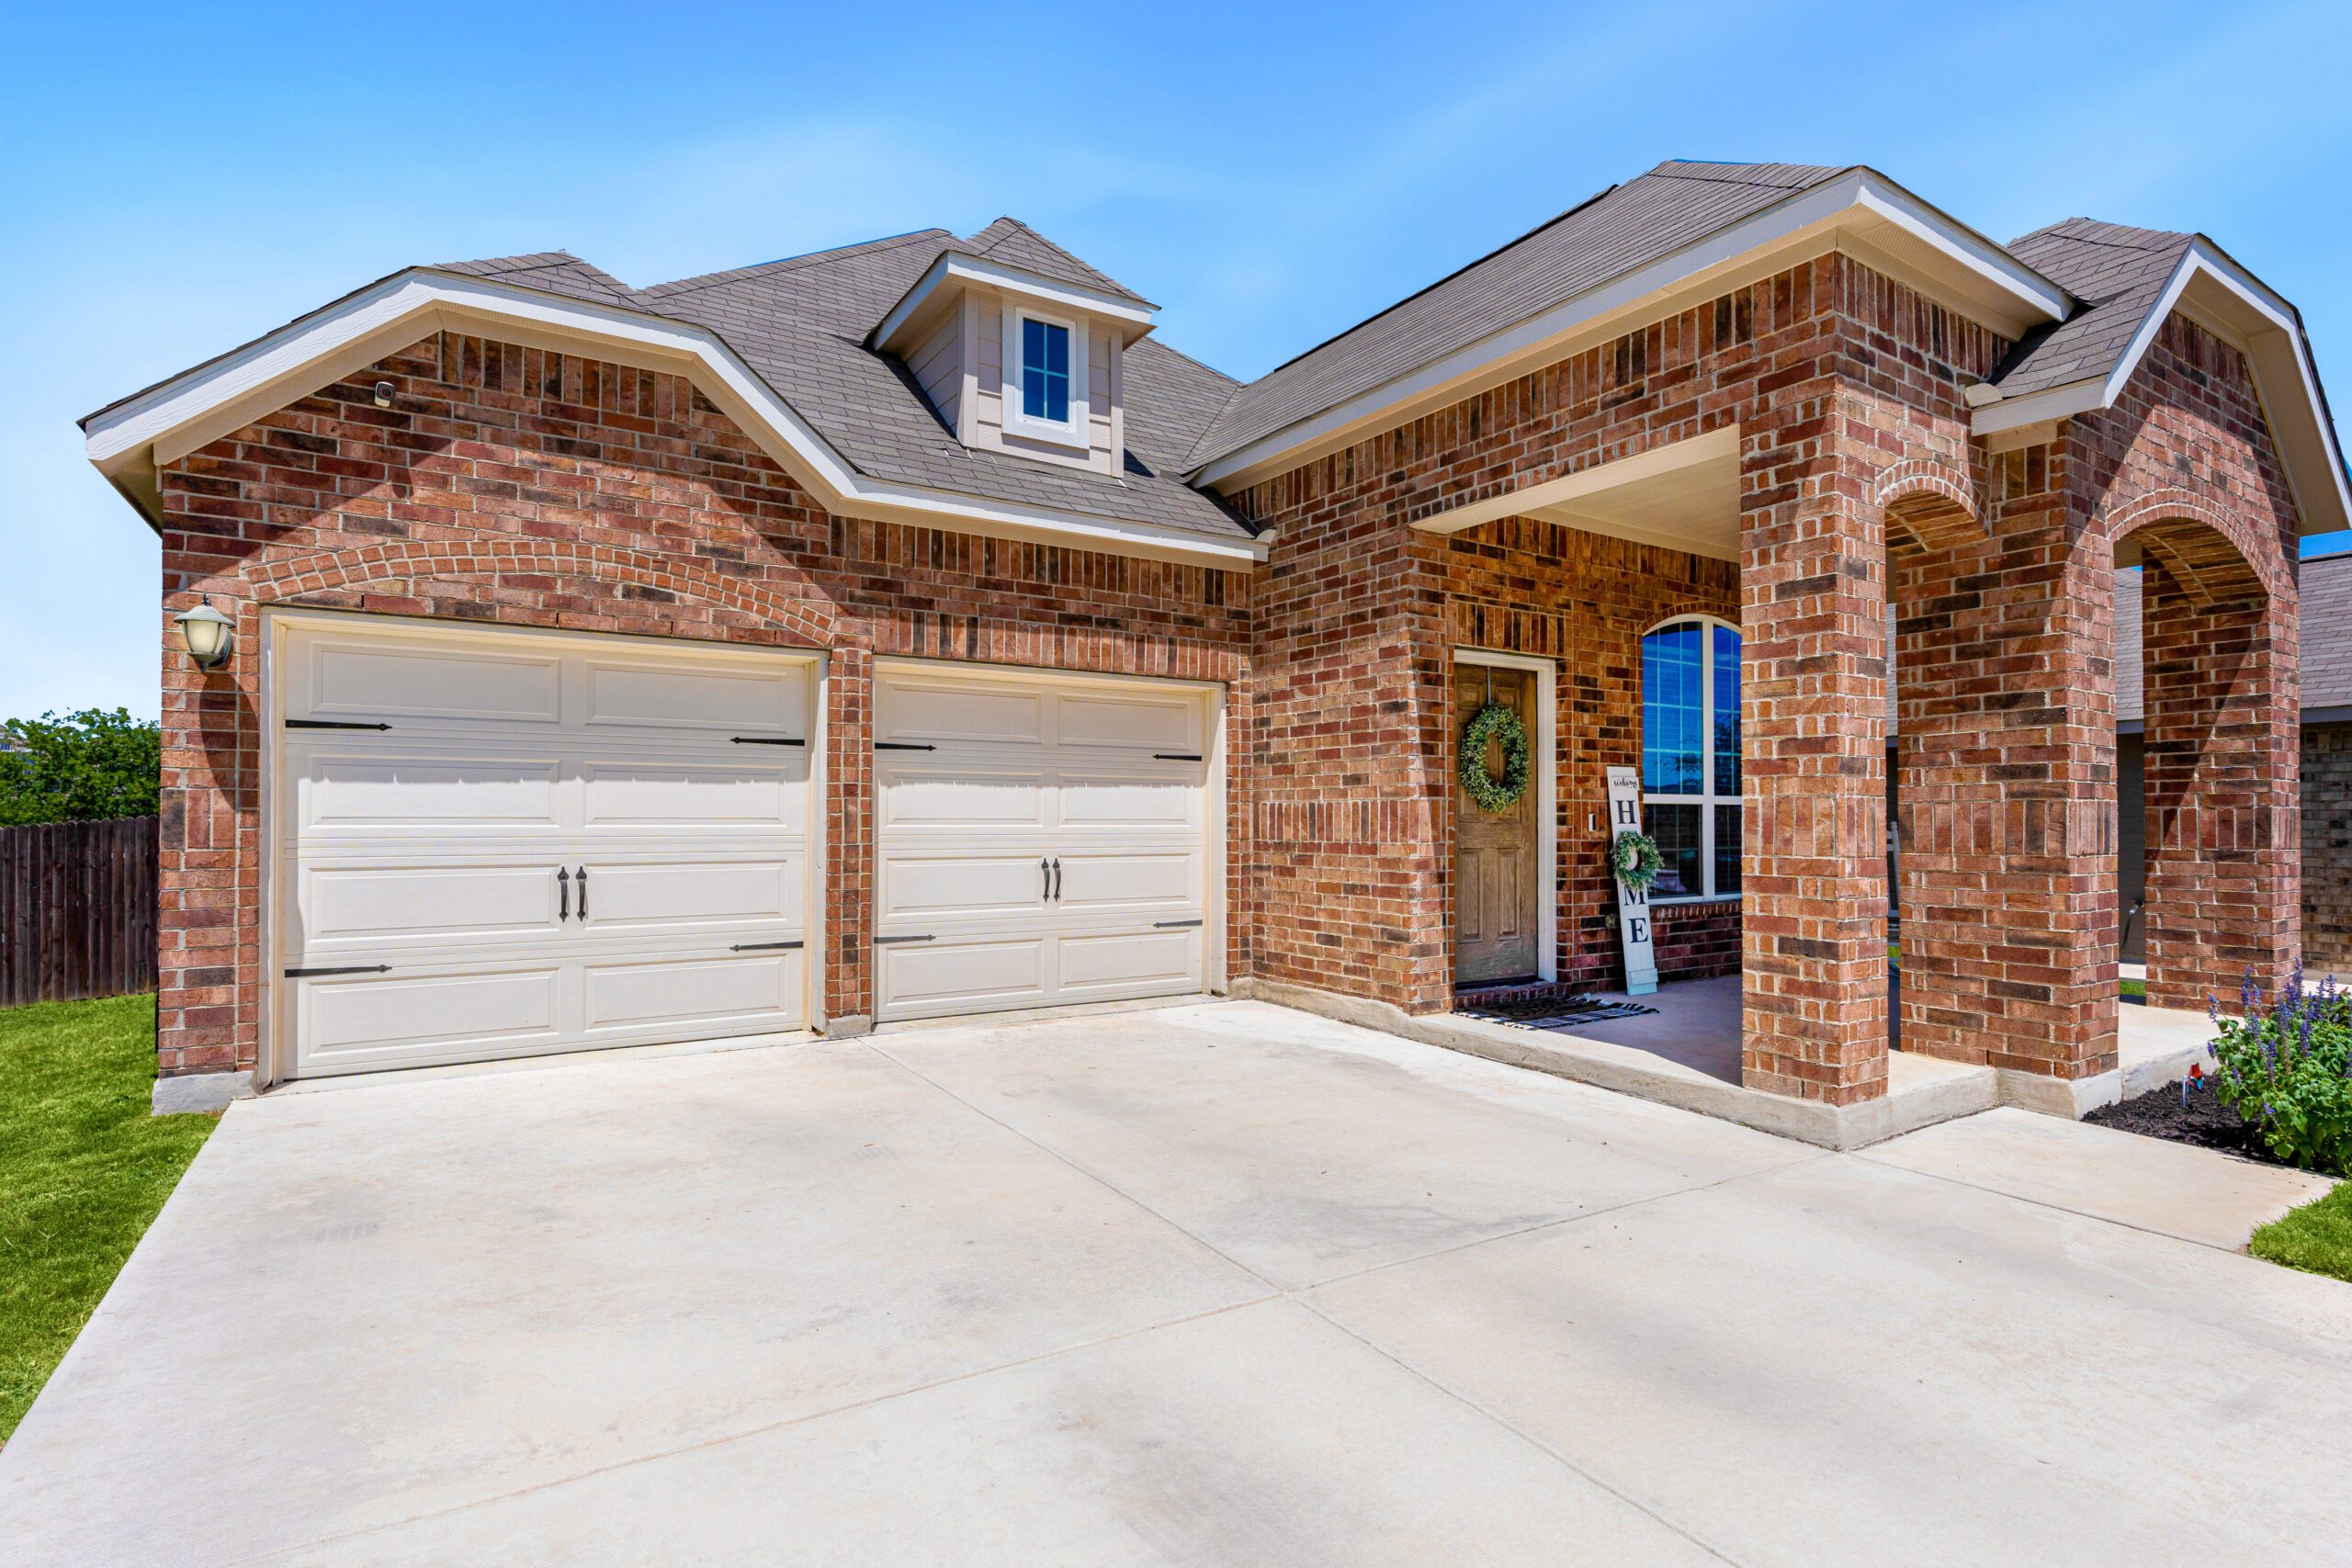 Get affordable garage door repair in Cottonwood Heights, Utah from the experts at Affordable Garage Door Fix. Contact us for a quote!"